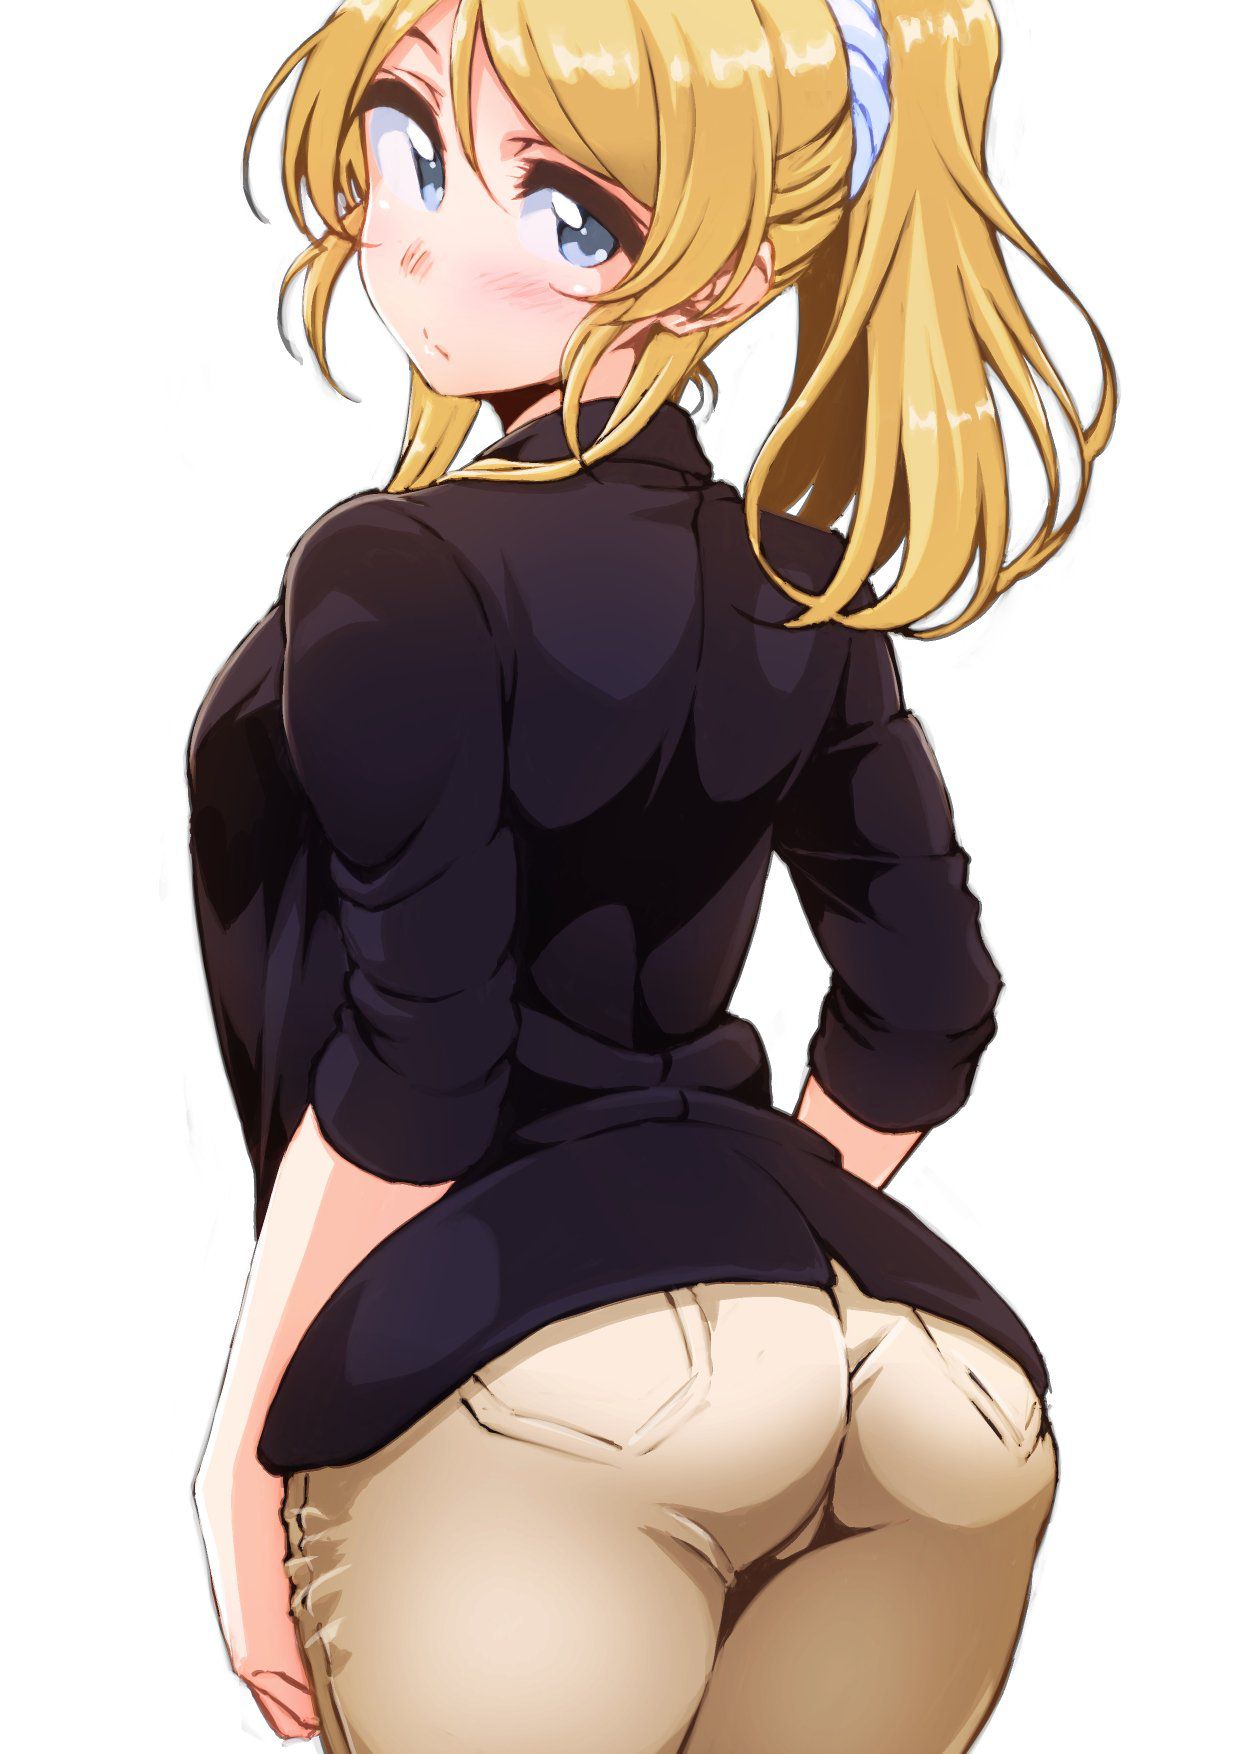 Secondary erotic image of a cute ponytail girl, 24 [ponytail] 35